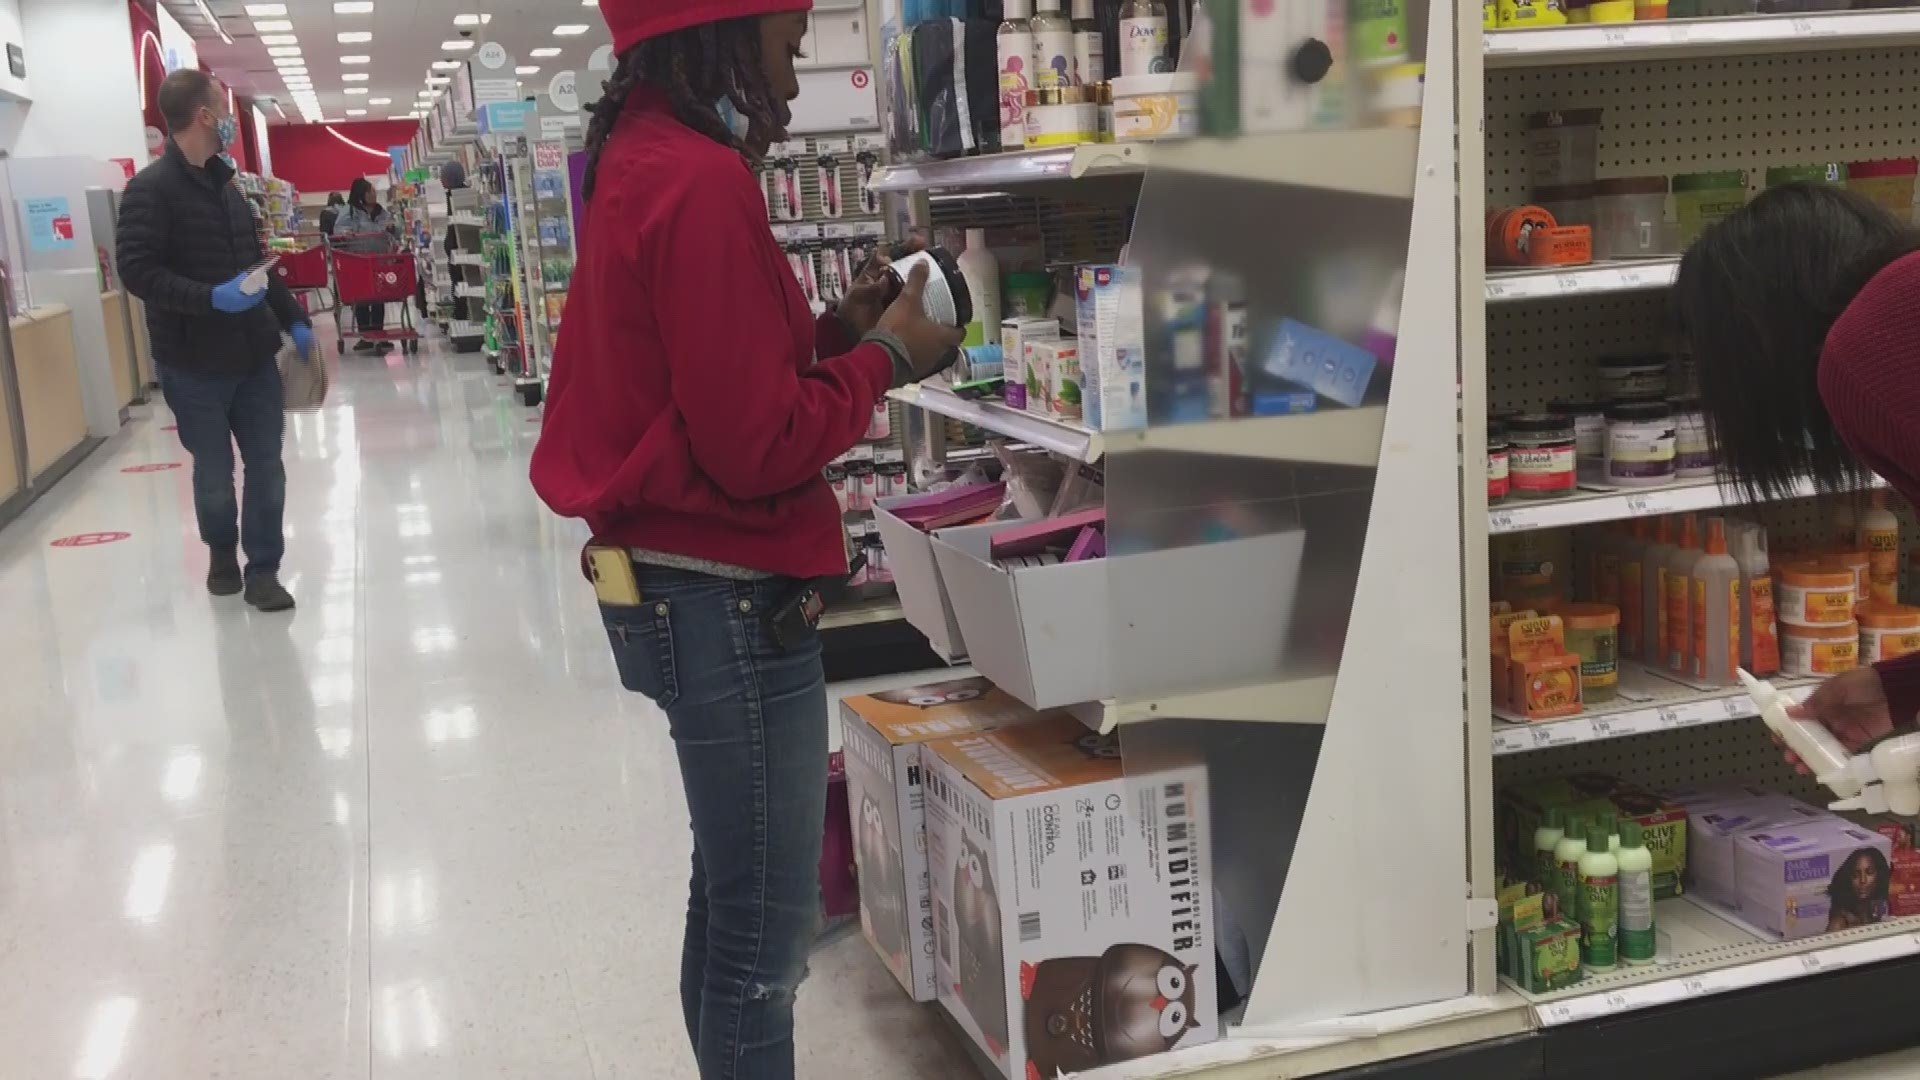 3News Investigates went into several grocery stores across Northeast Ohio. Are employees wearing masks?